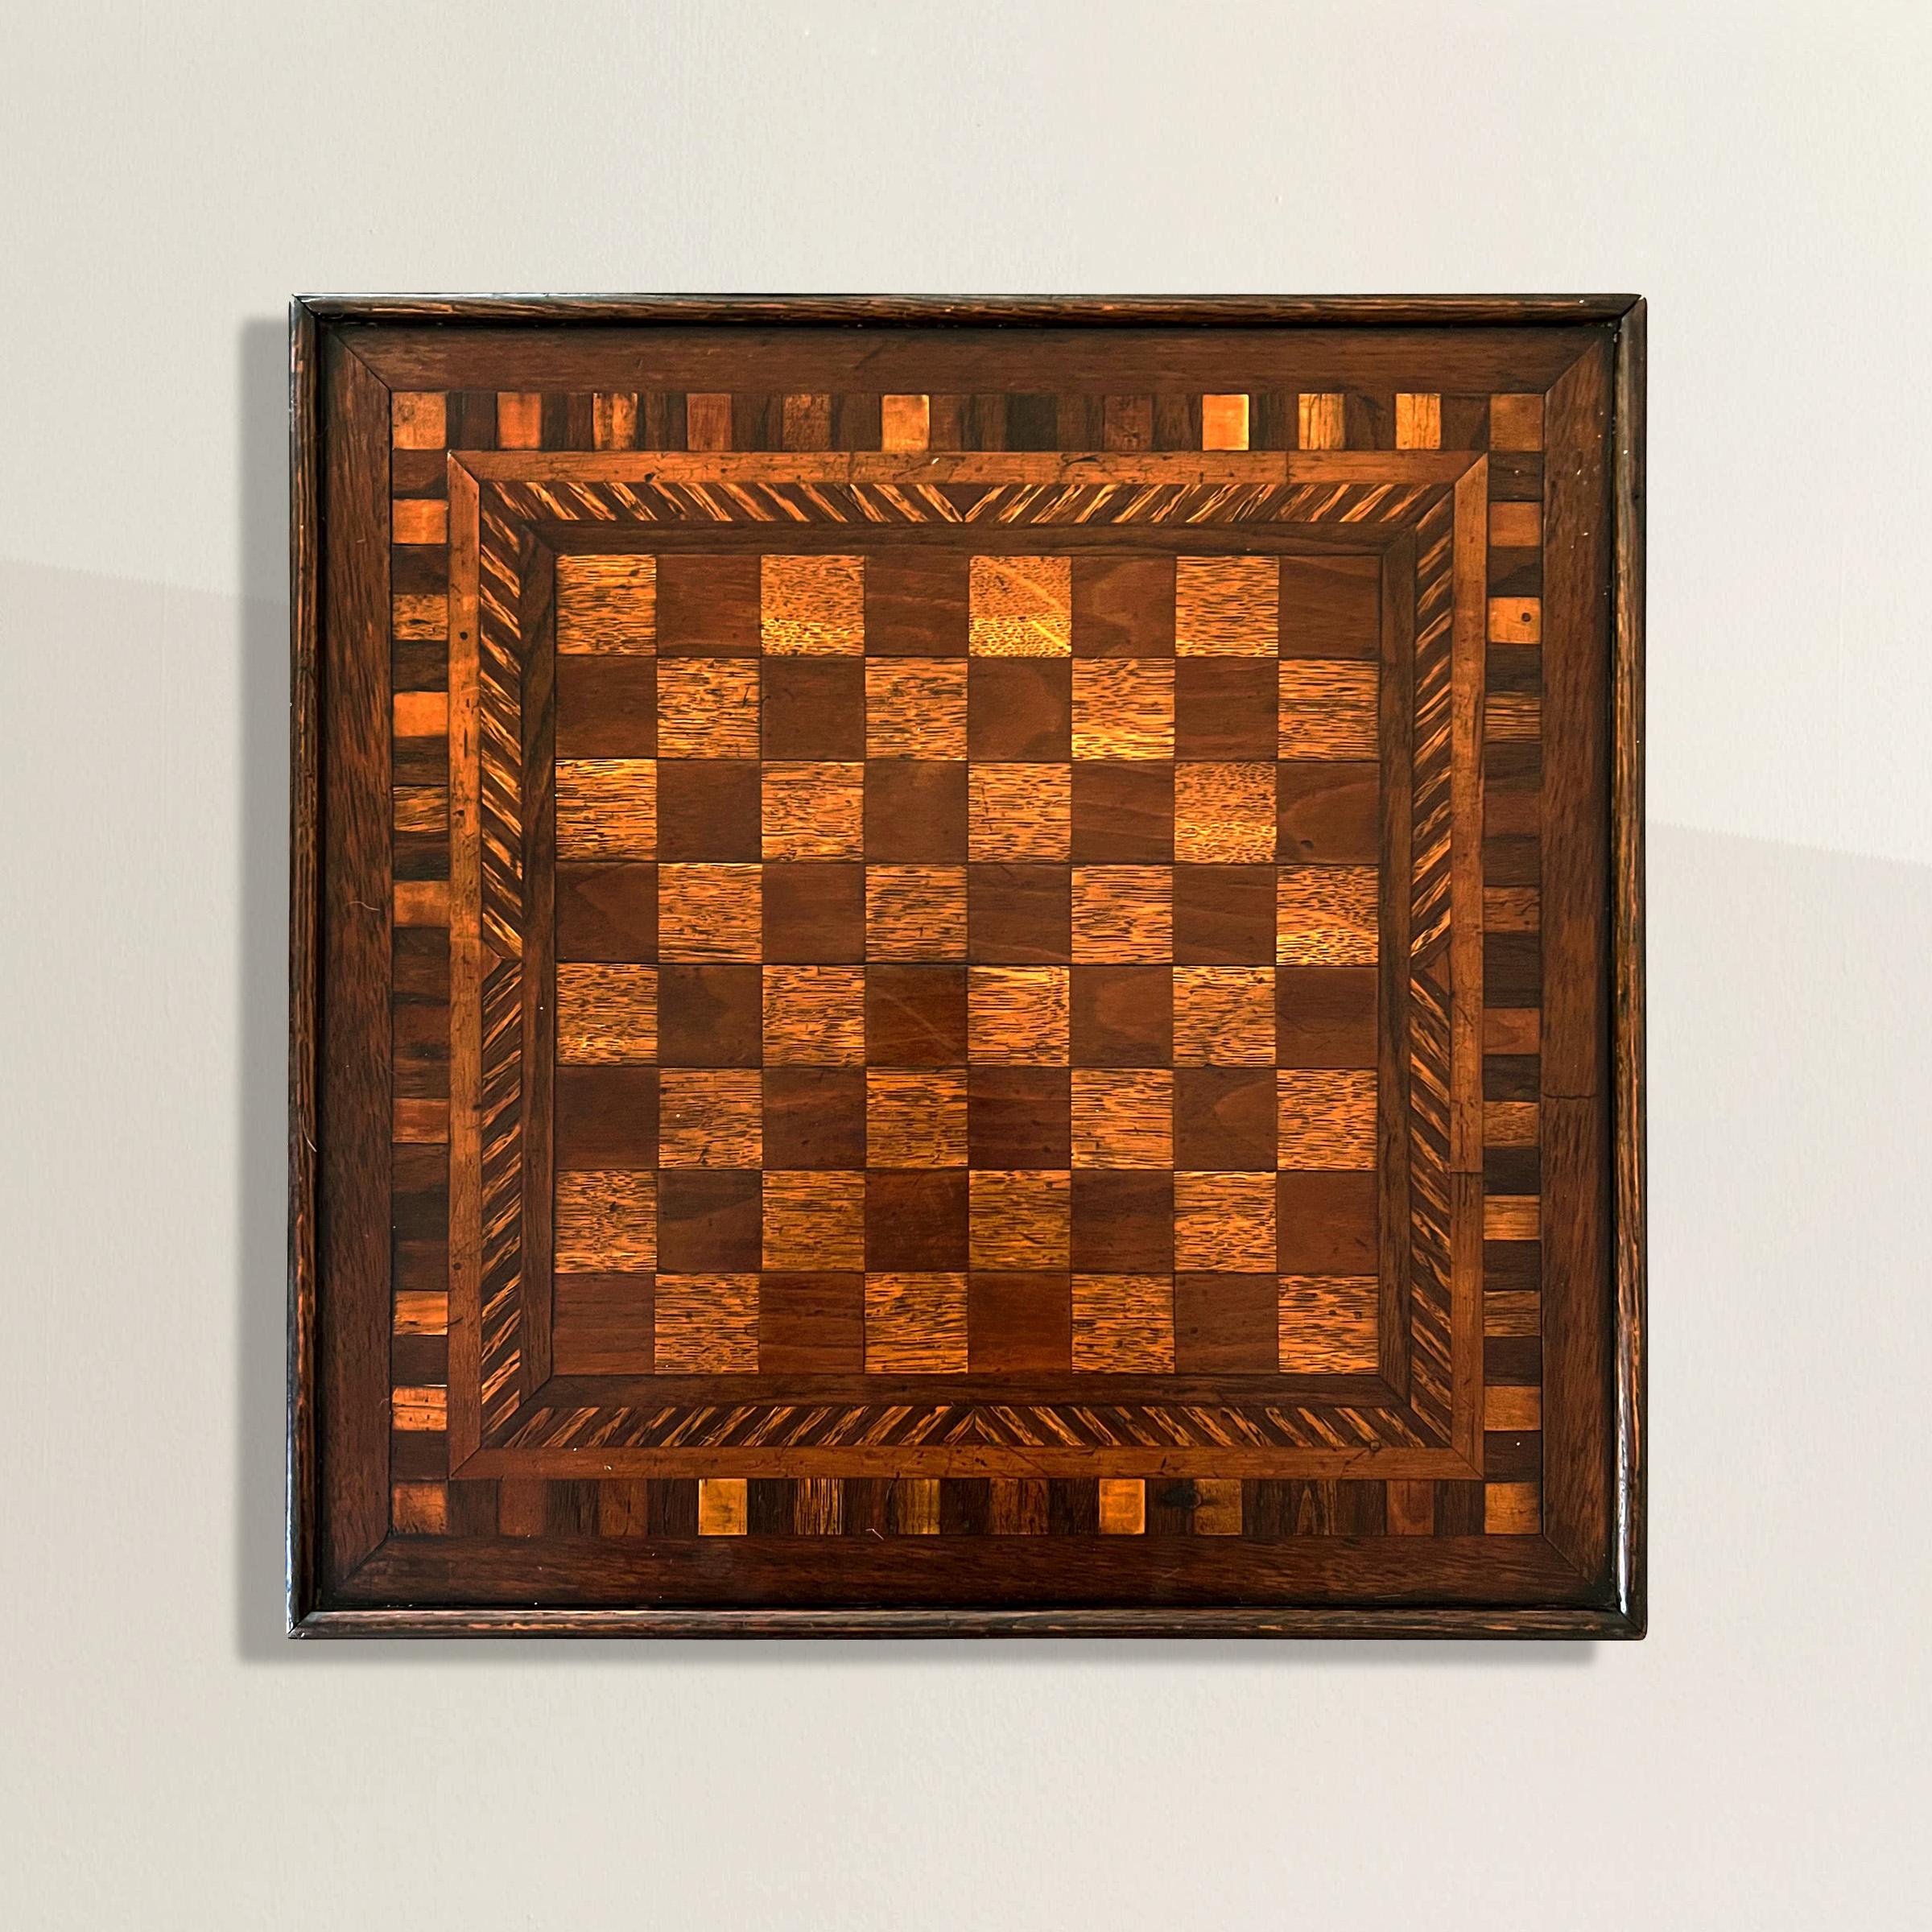 Transport yourself to the enchanting world of traditional American folk art with this 19th-century game board, a true embodiment of the cherished folk art game board tradition. Crafted with a charming combination of oak and mahogany, this